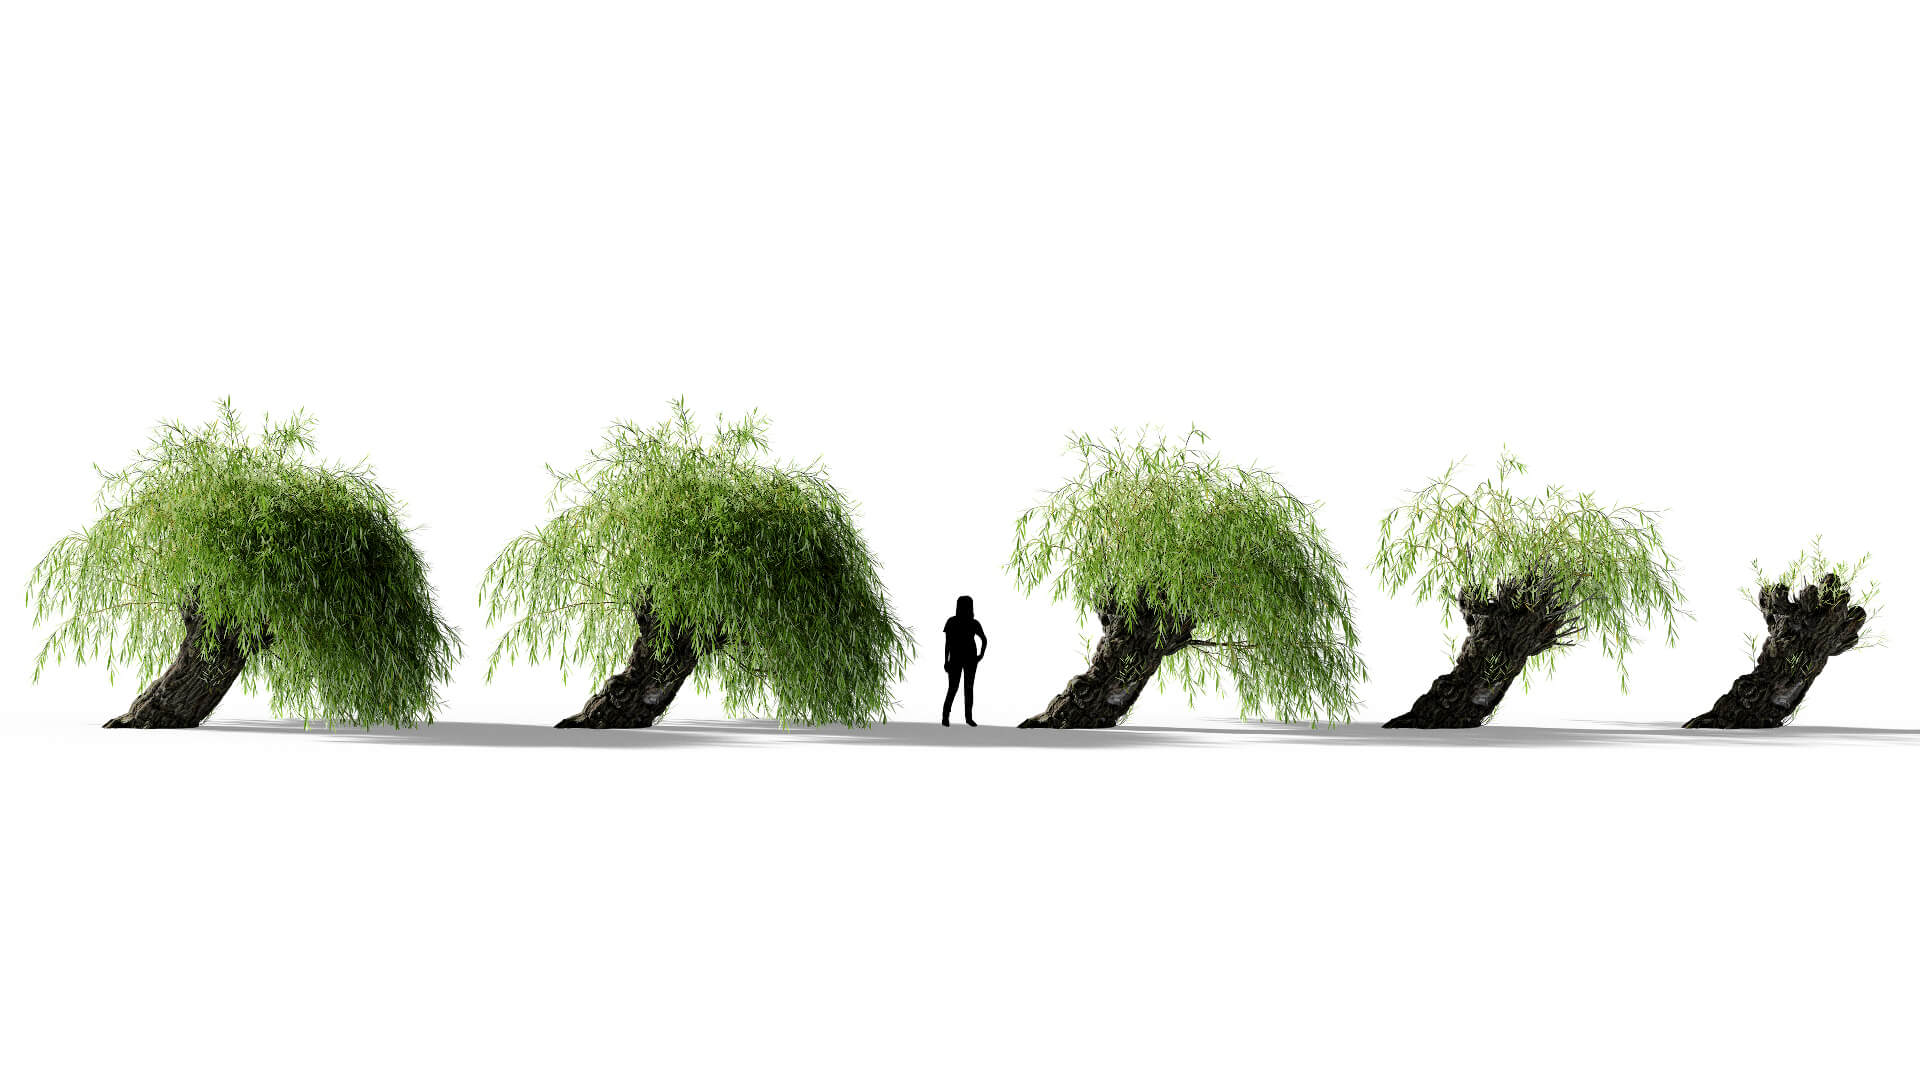 3D model of the Weeping willow pollarded Salix babylonica pollarded health variations